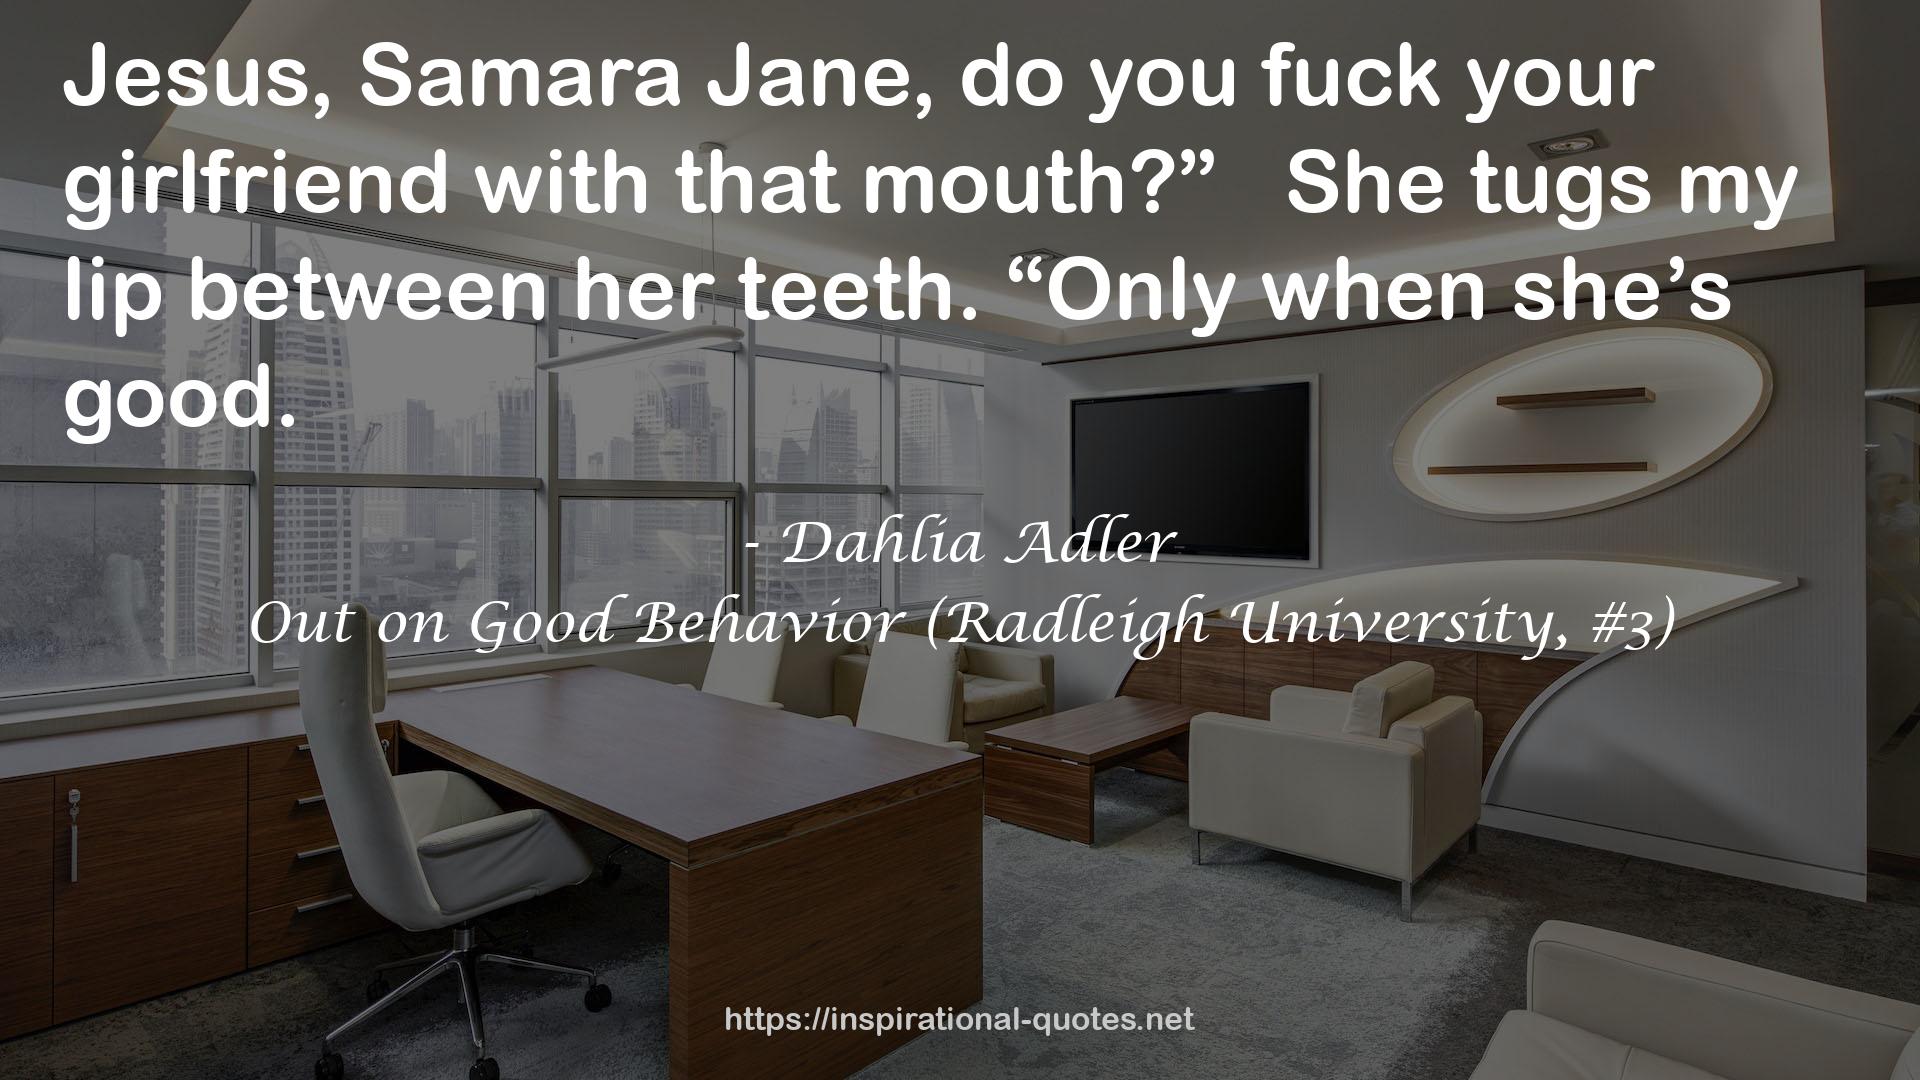 Out on Good Behavior (Radleigh University, #3) QUOTES